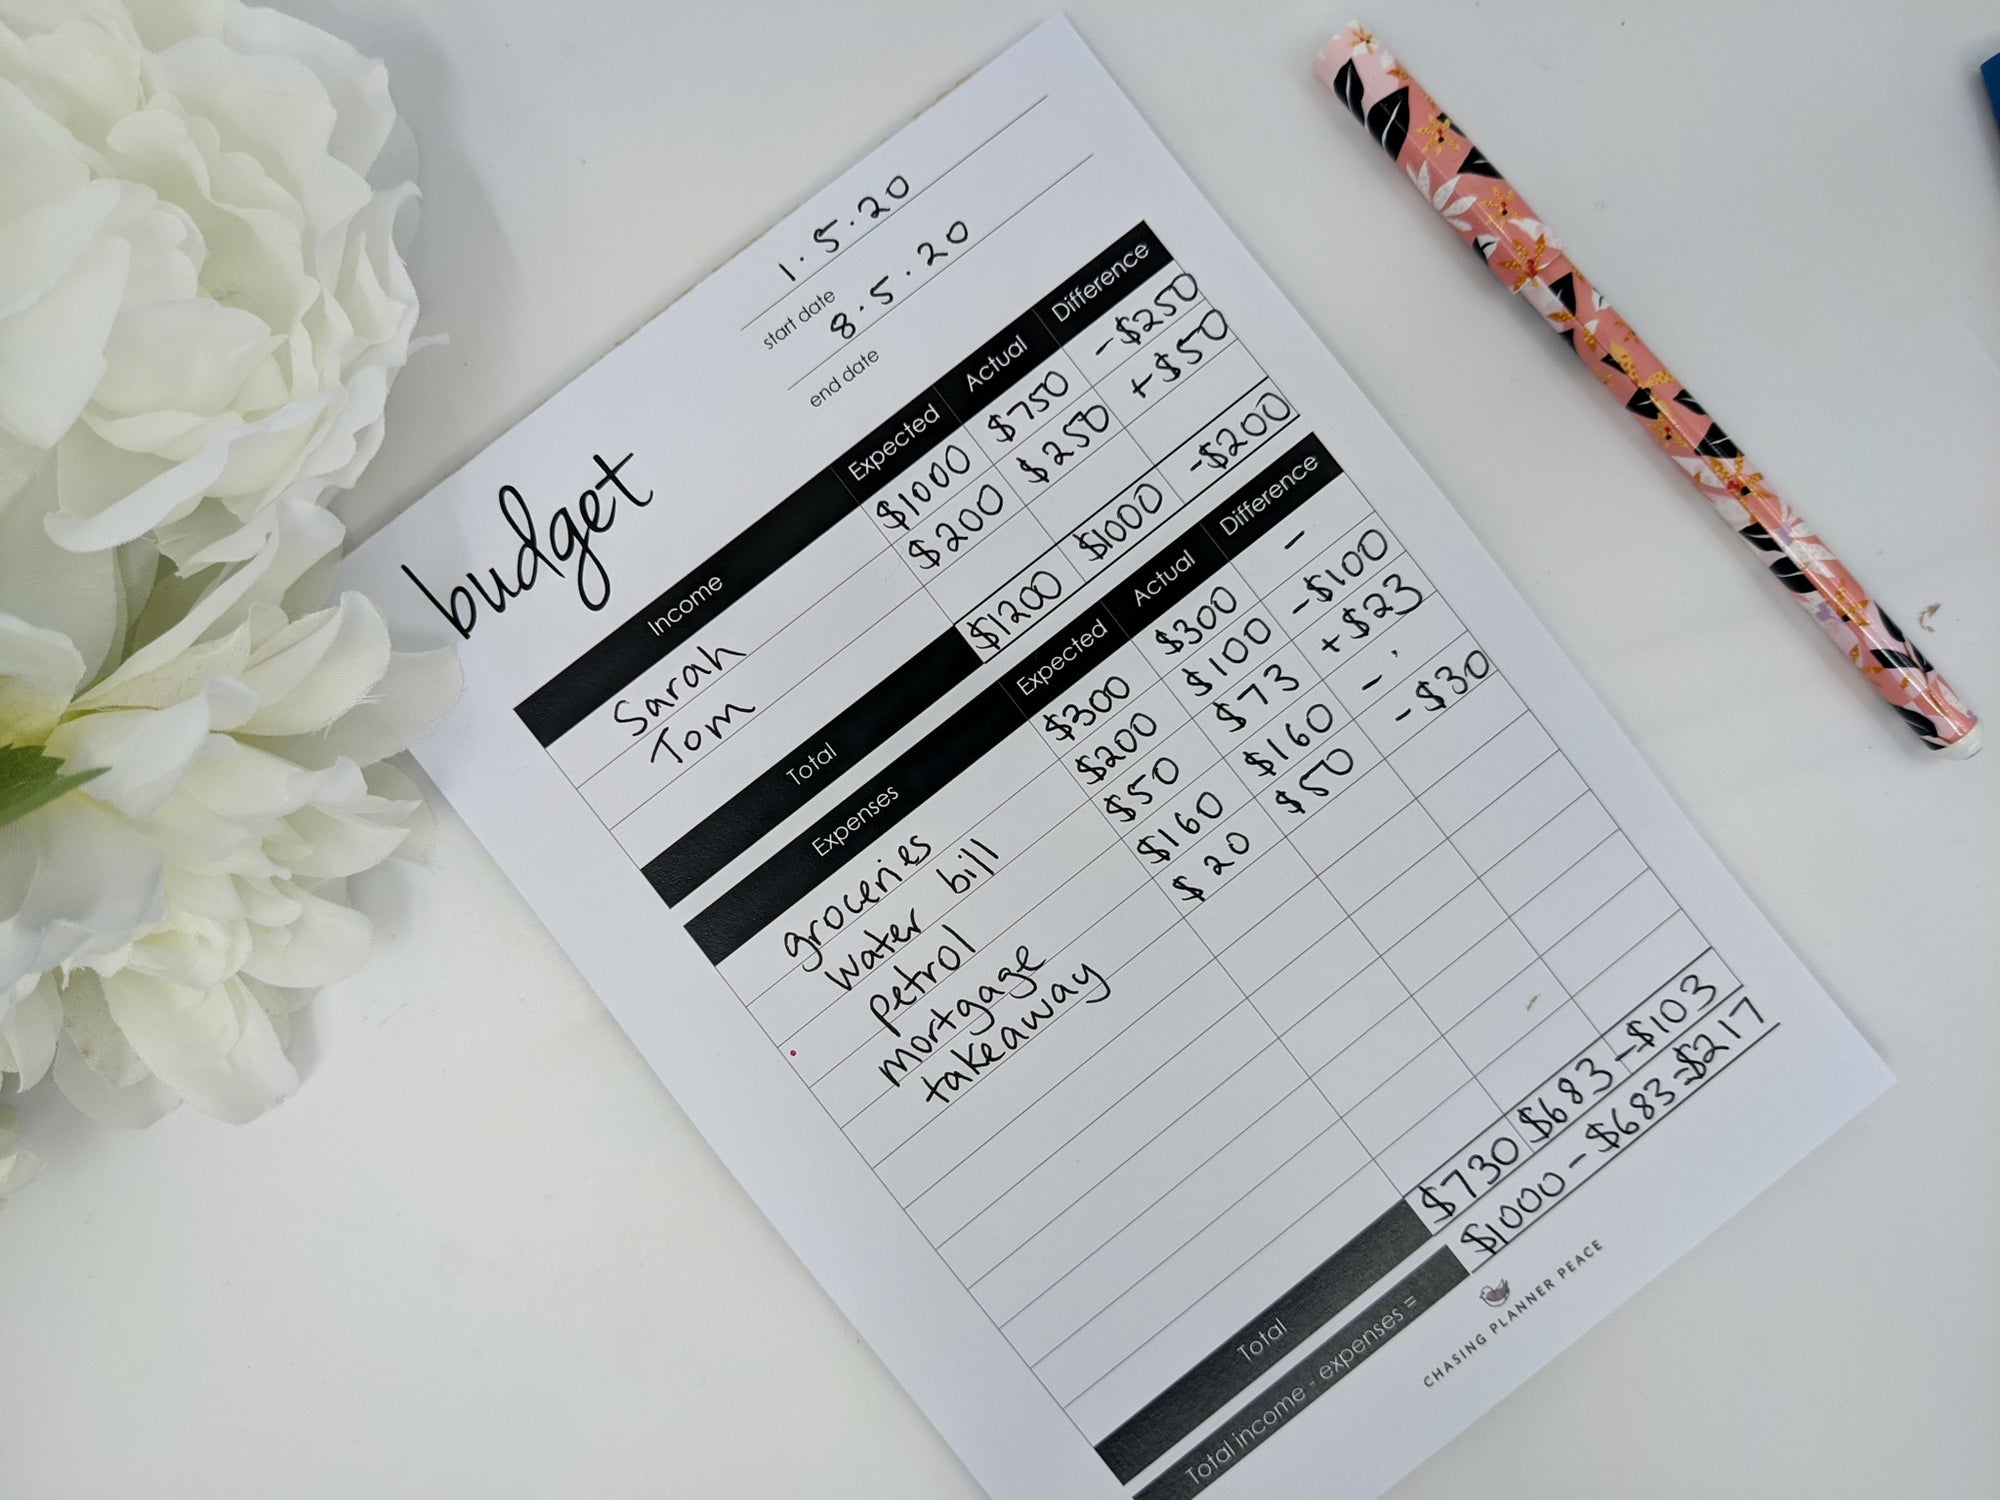 A5 notepad for budgeting with categories filled out